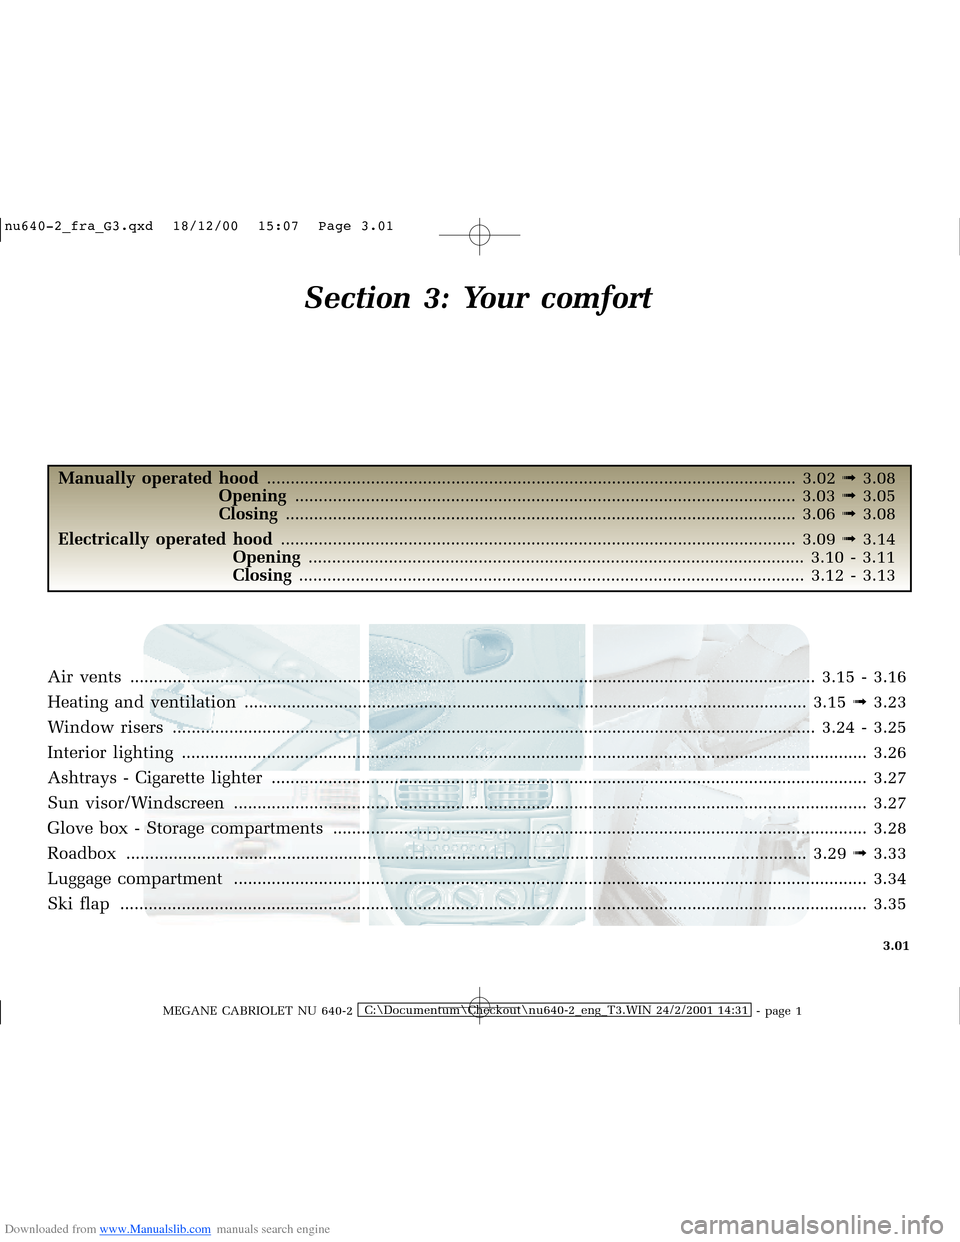 RENAULT MEGANE 2000 X64 / 1.G Owners Manual Downloaded from www.Manualslib.com manuals search engine �Q�X������B�I�U�D�B�*���T�[�G� � ��������� � ������ � �3�D�J�H� ����
MEGANE CABRIOLET NU 640-2C:\Documentum\Chec